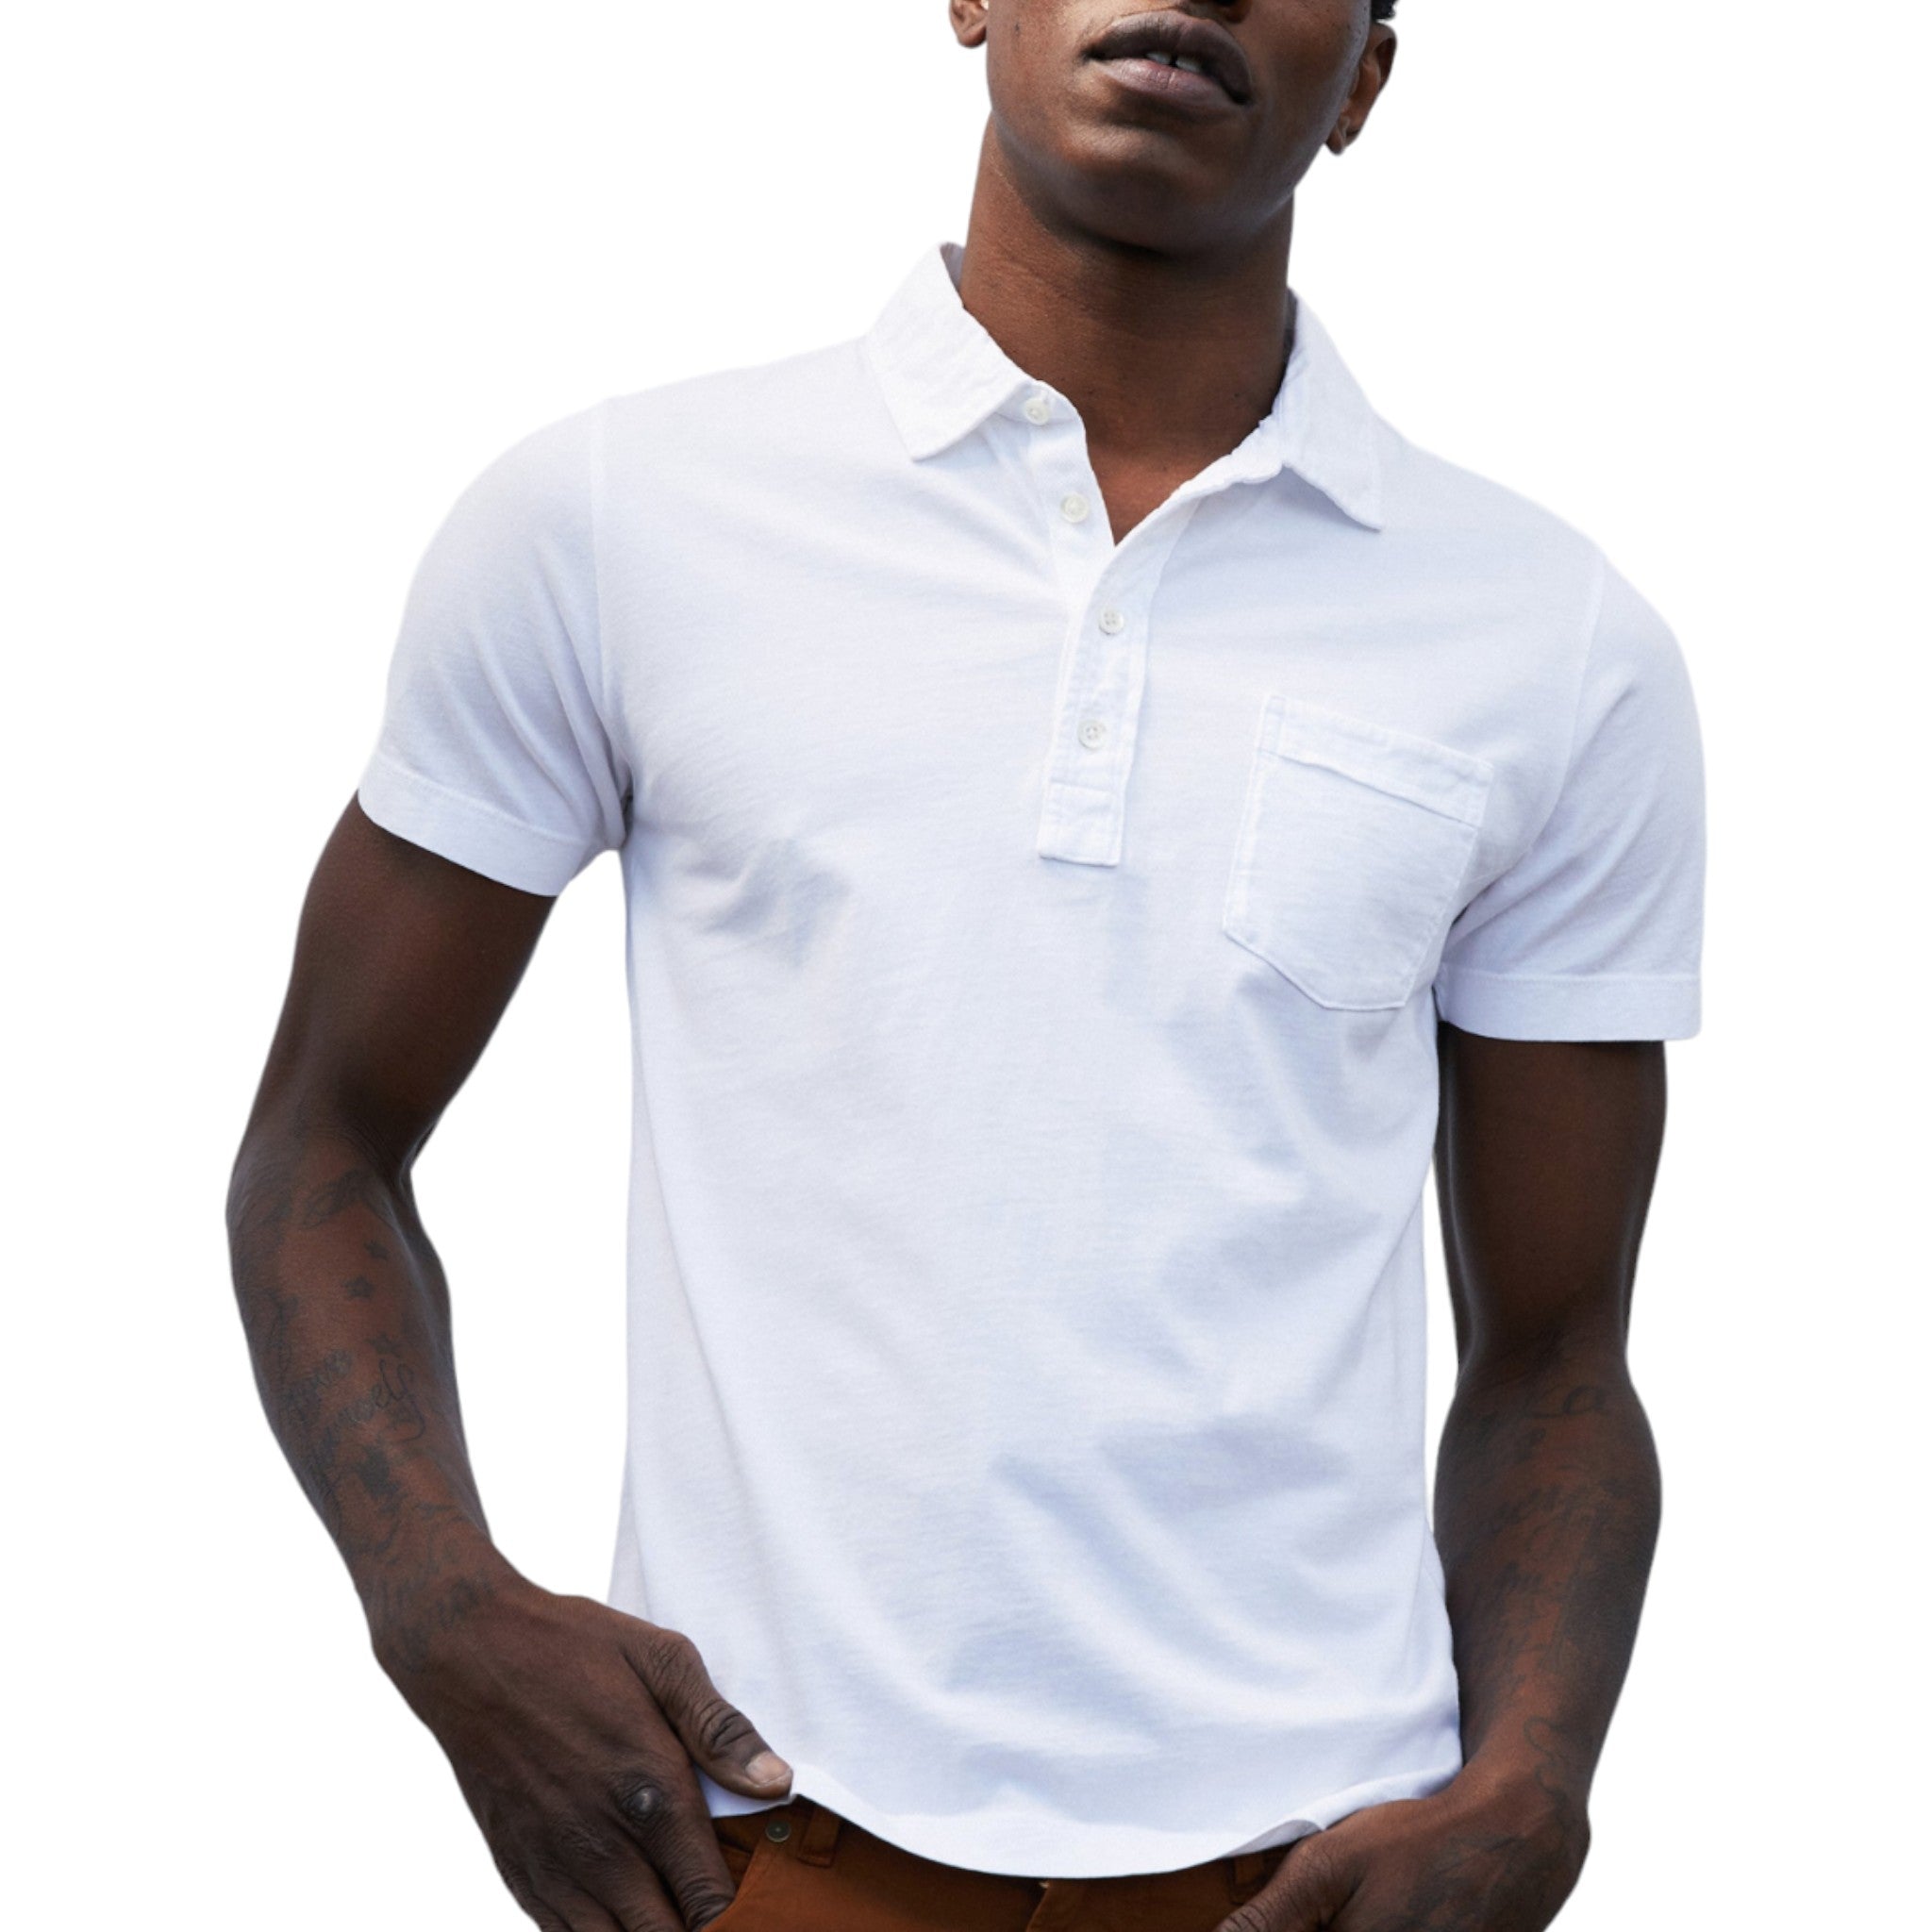 Short sleeve white polo with three buttons